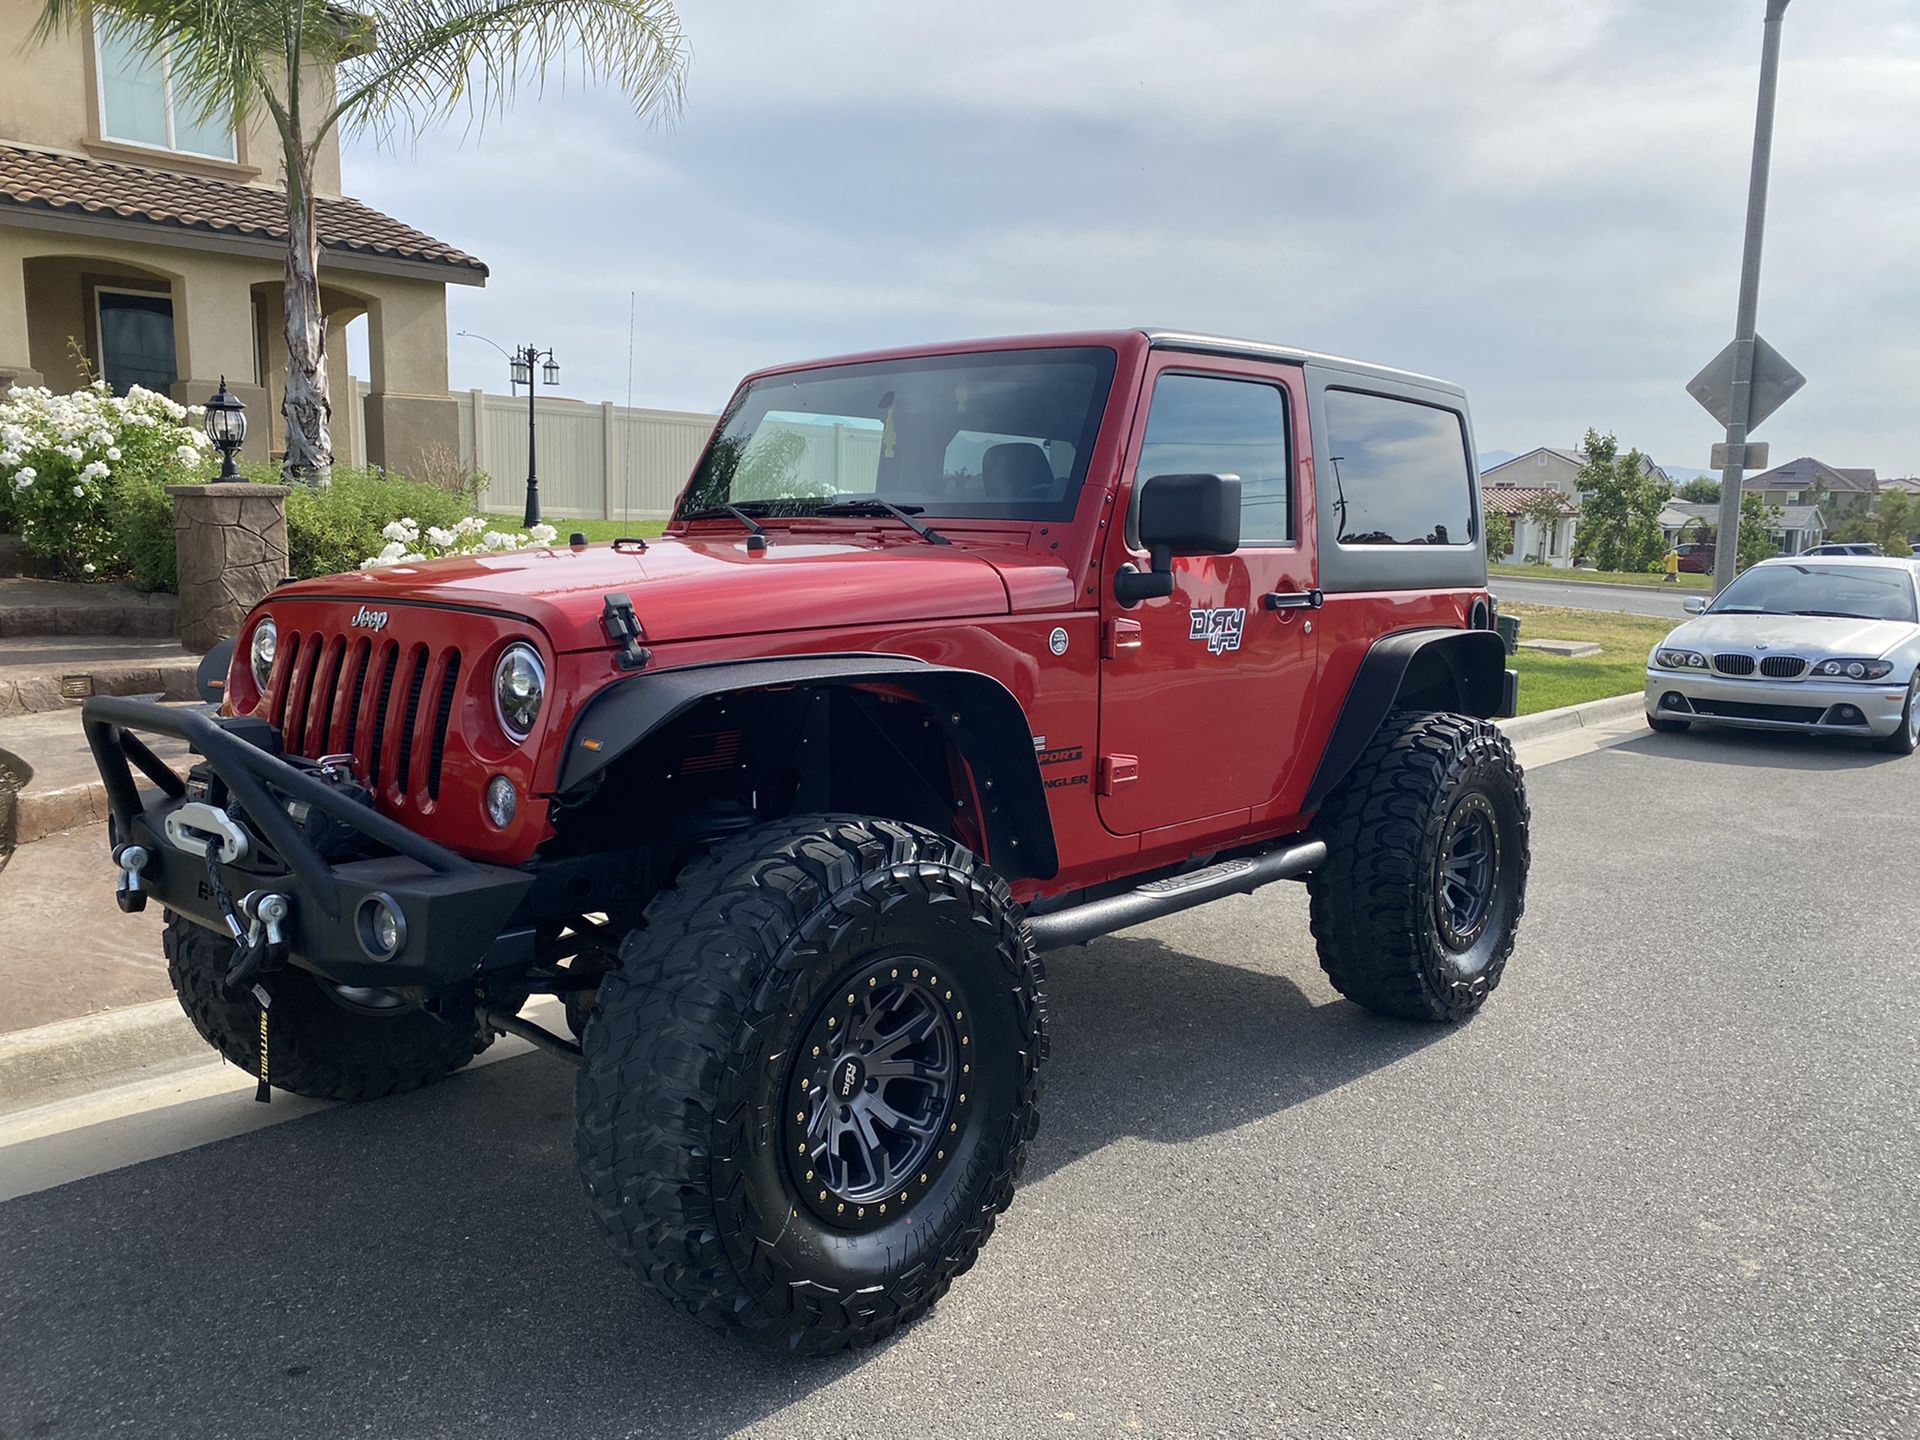 2015 Jeep Wrangler Jk low miles like new with 37s and 4 inch lift